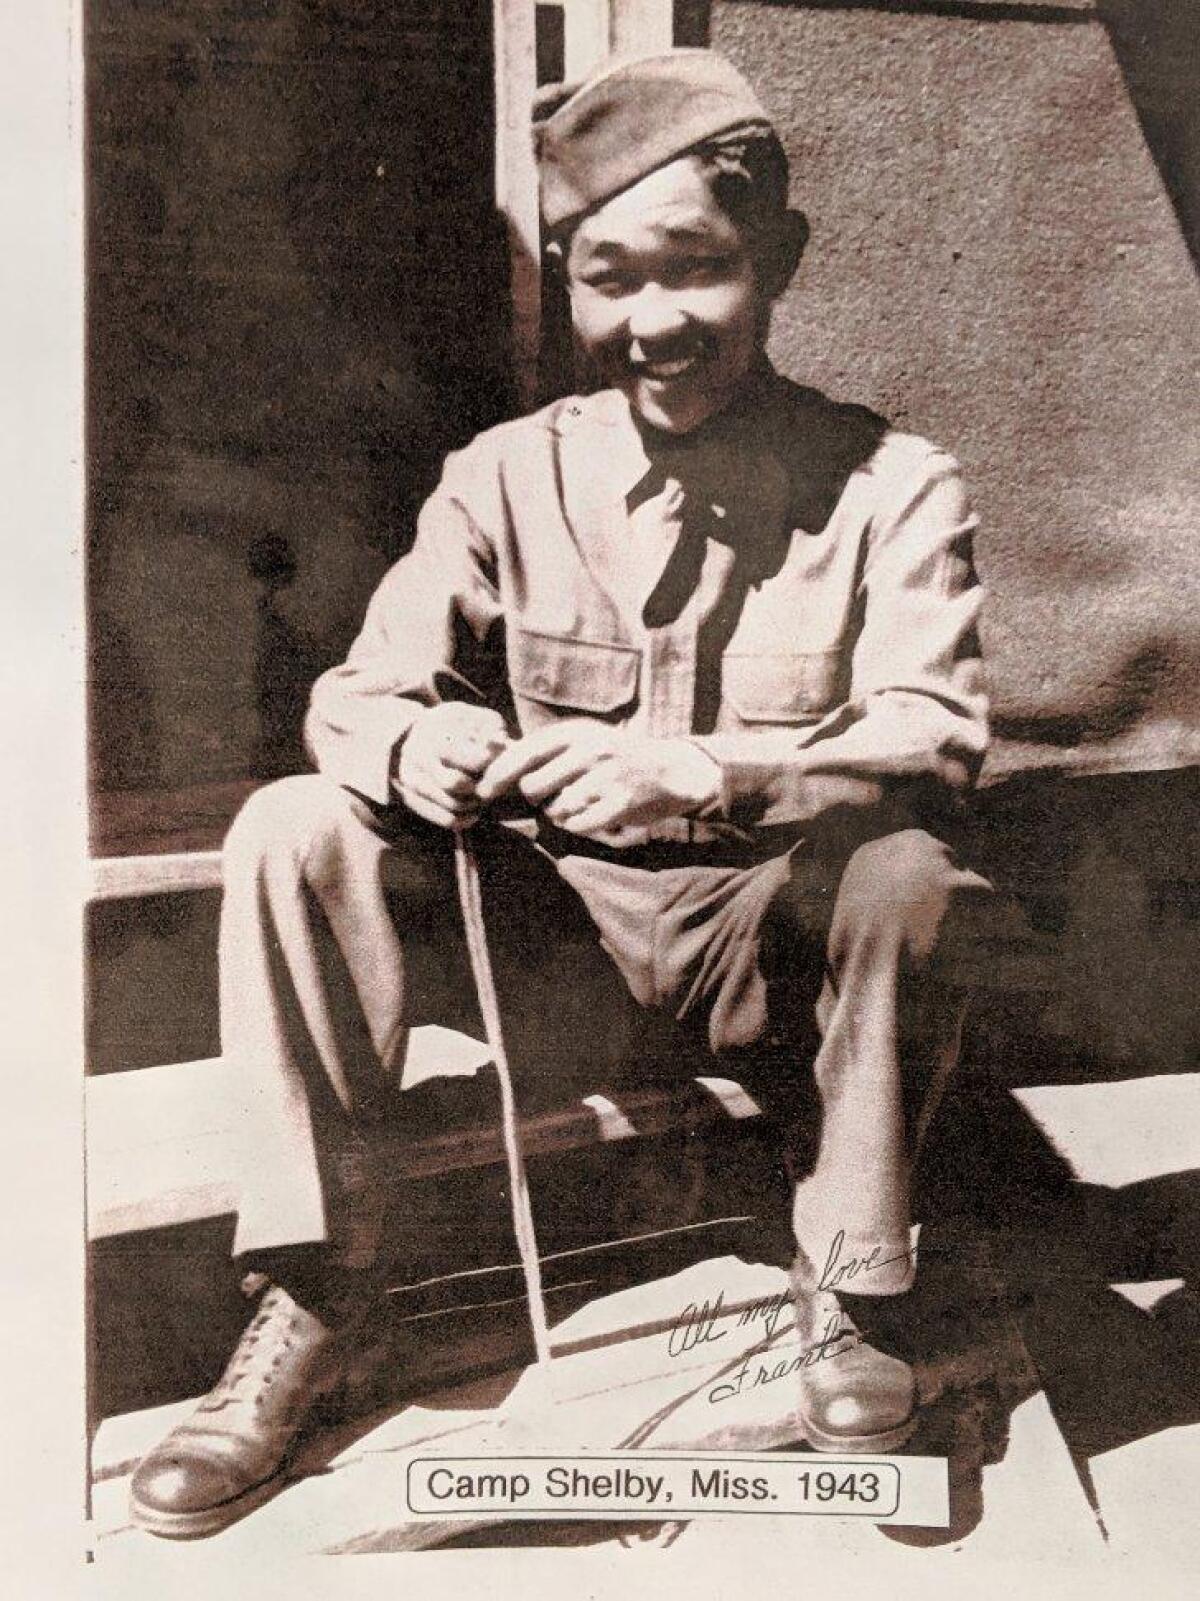 In a black-and-white photo, young Frank Wada sits on a step in his military uniform.